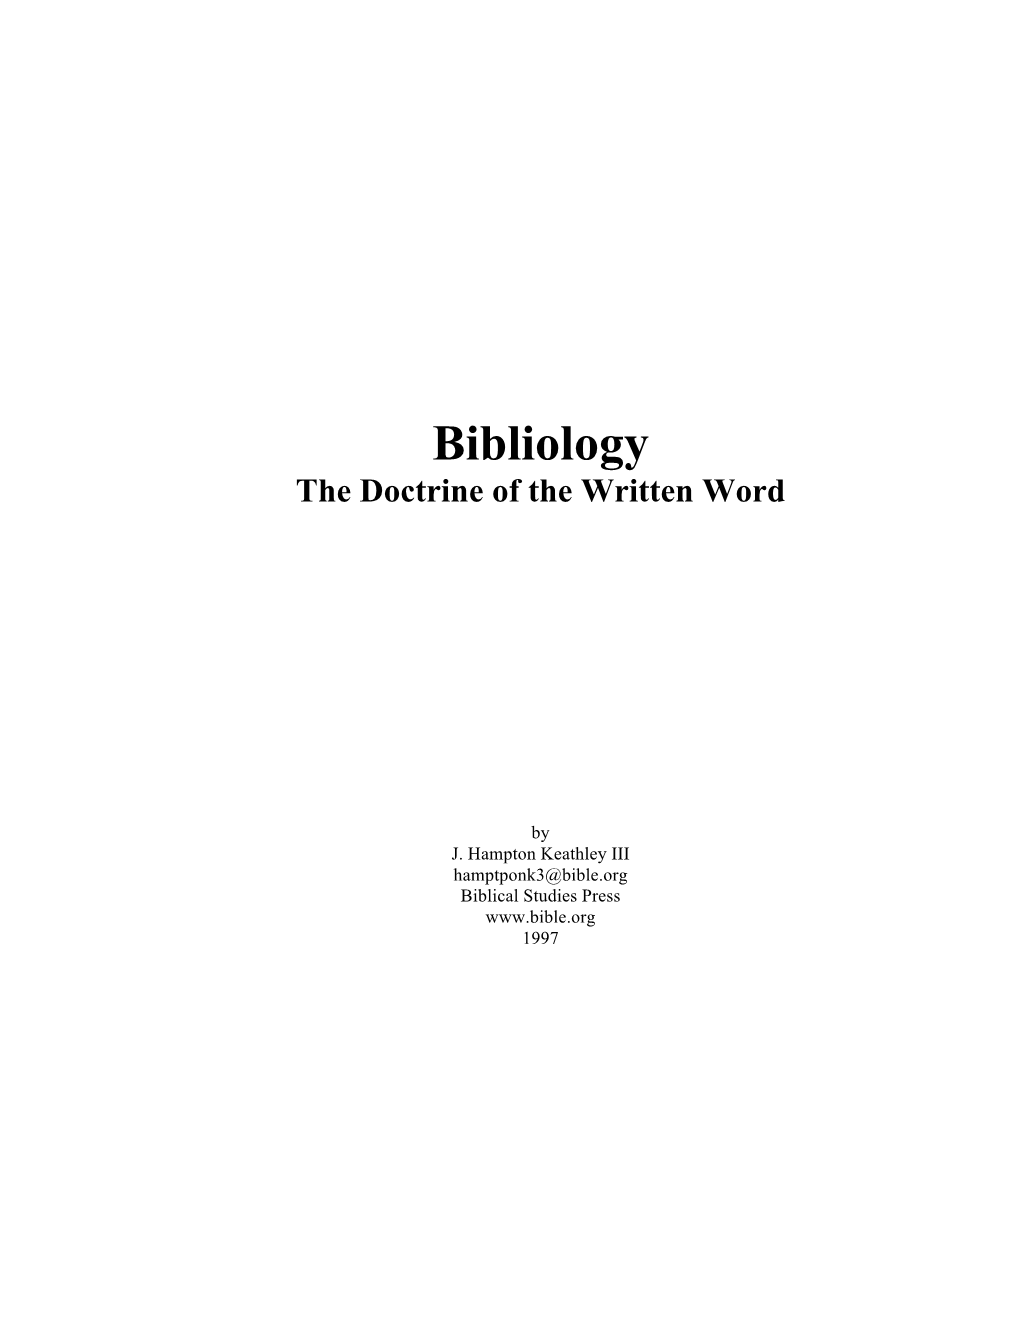 Bibliology the Doctrine of the Written Word